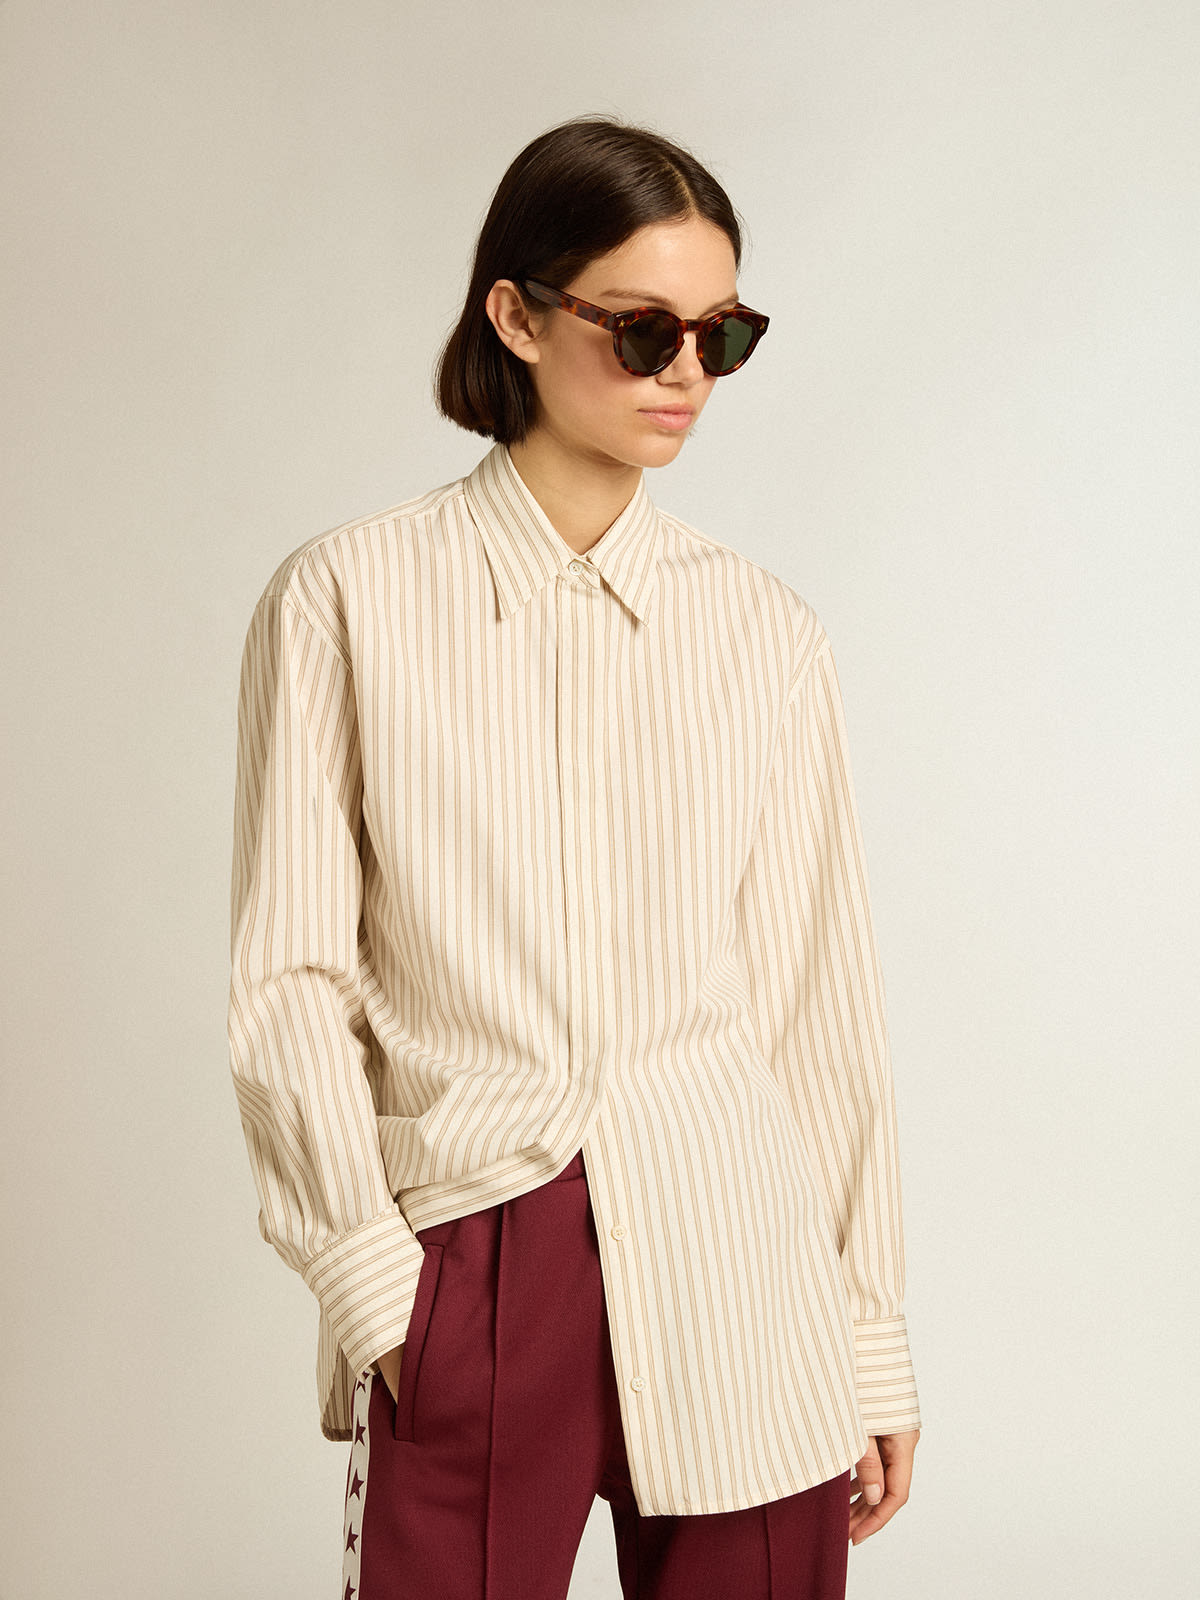 Golden Goose - Women’s white cotton shirt with beige stripes in 